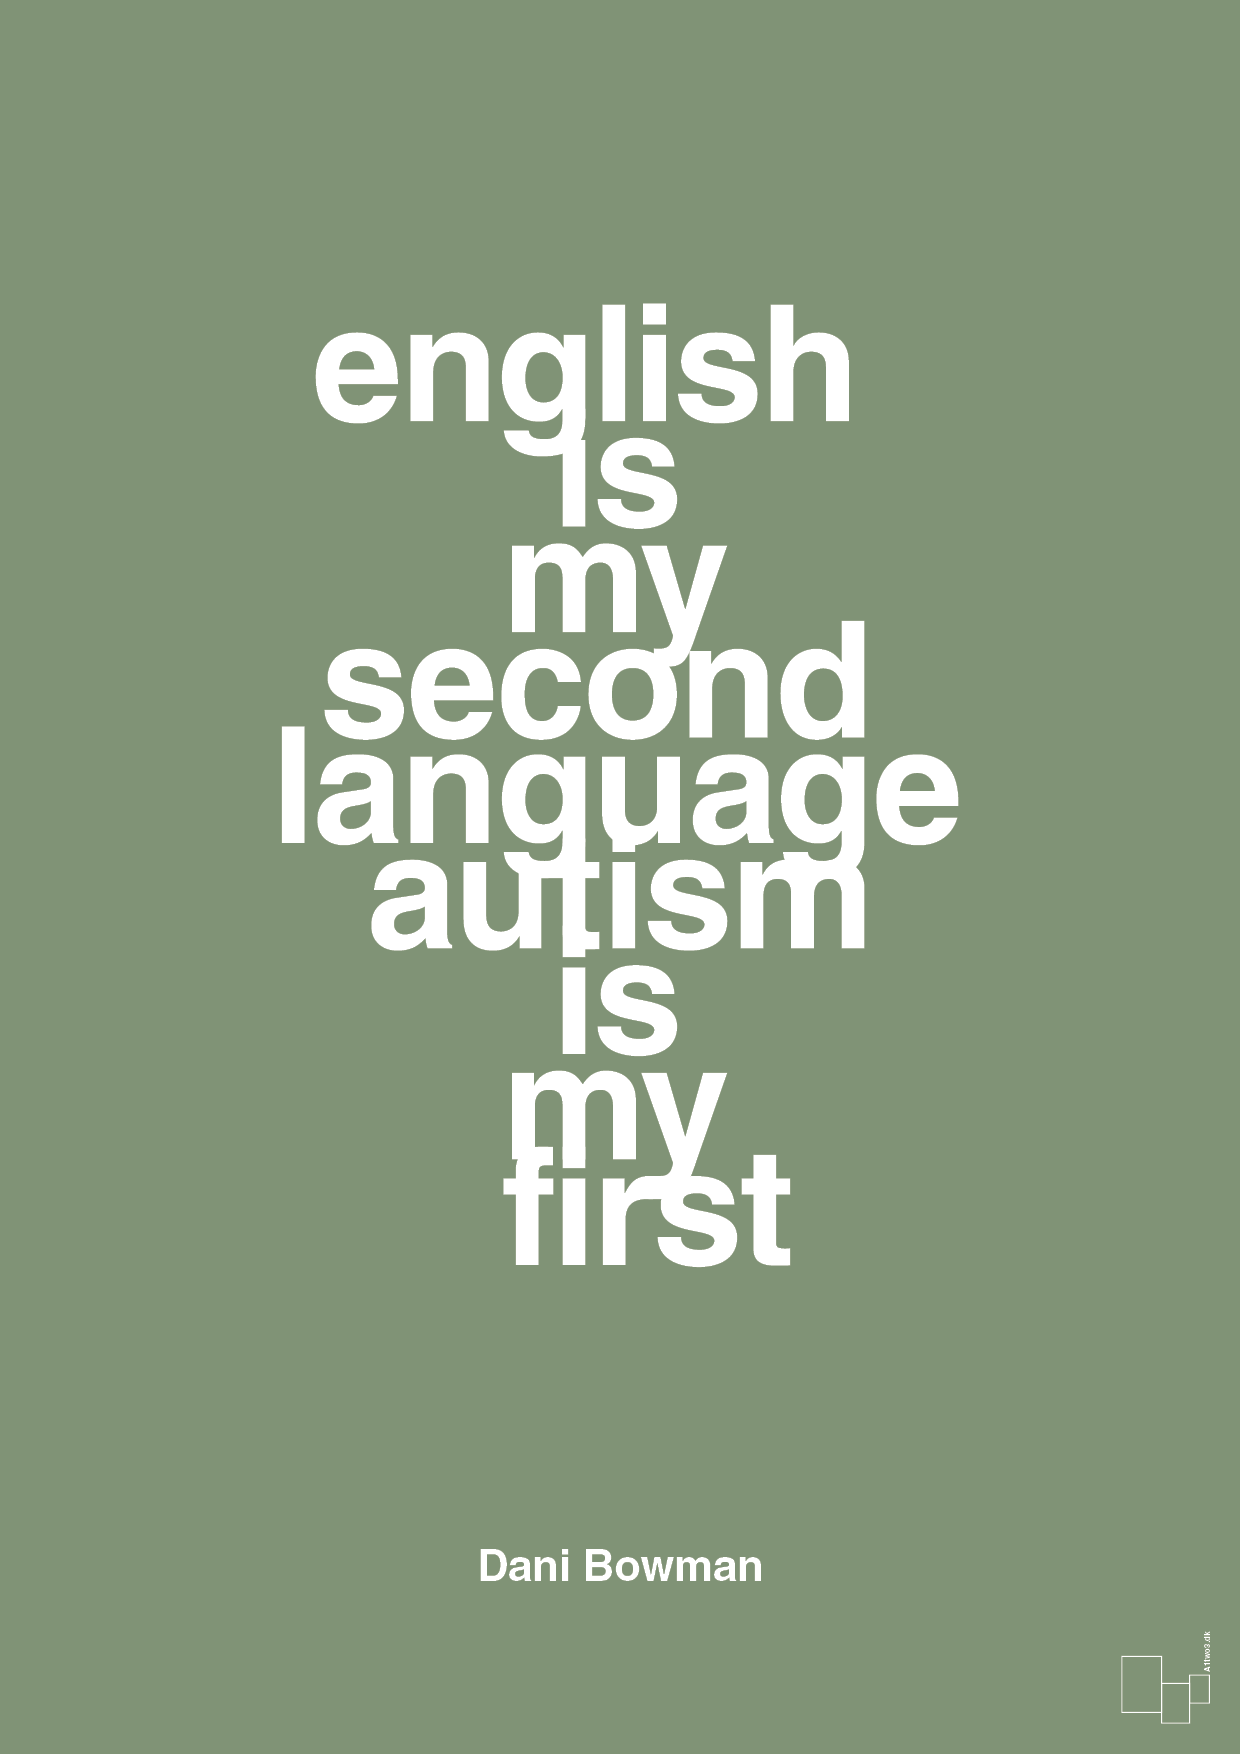 english is my second language autism is my first - Plakat med Samfund i Jade